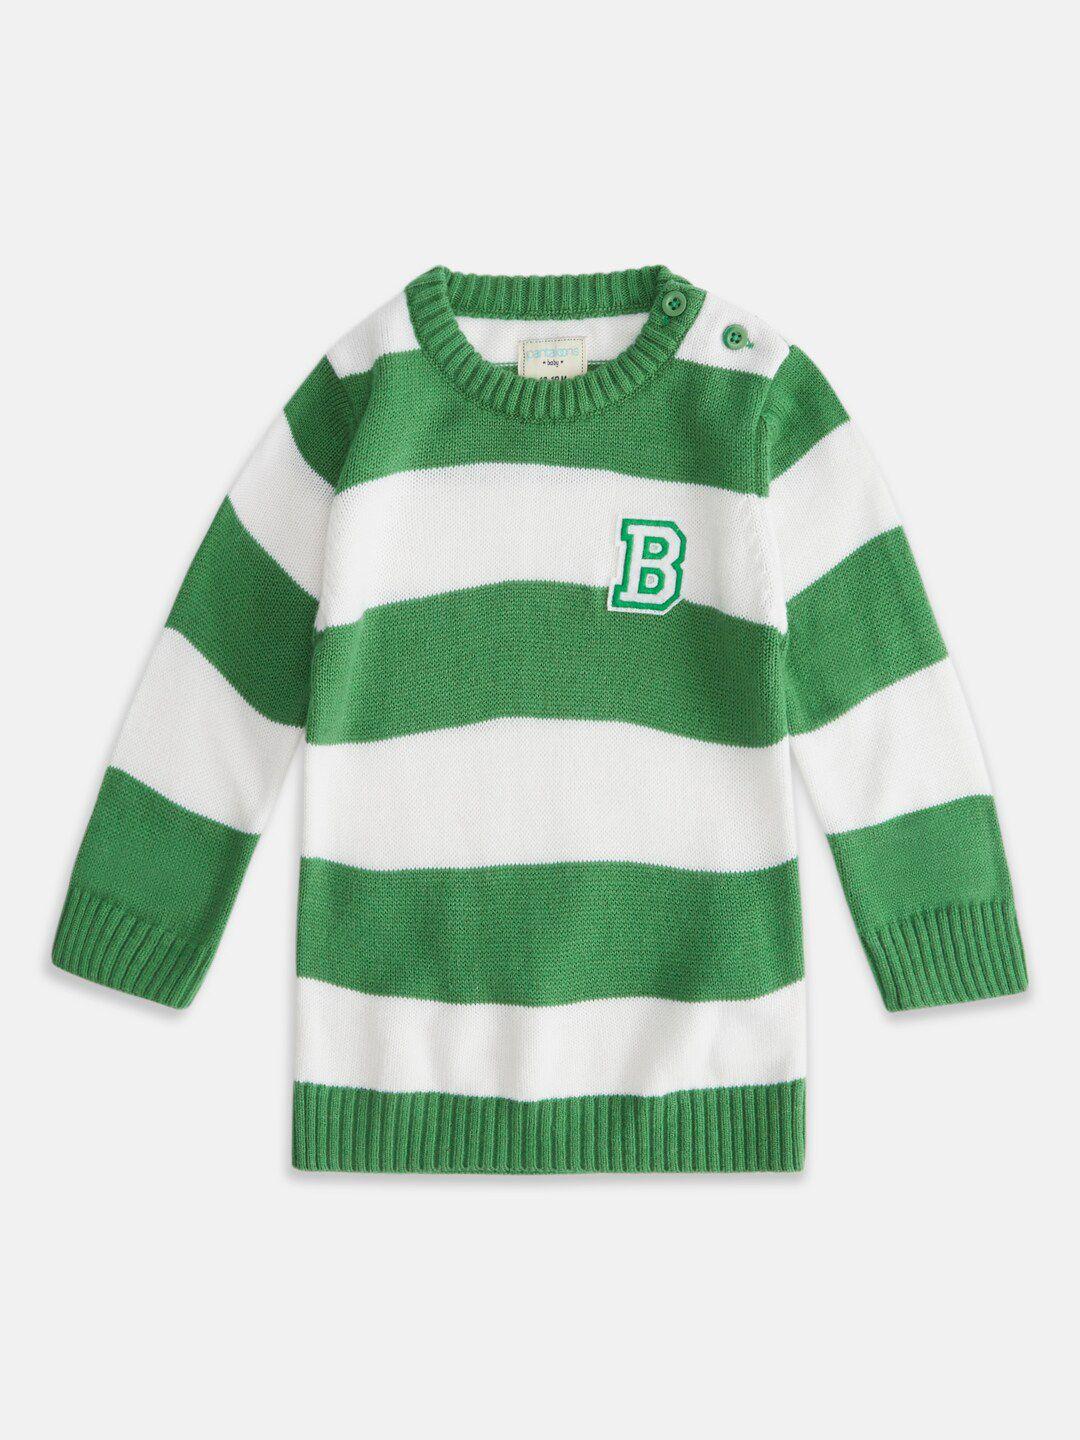 pantaloons-baby-boys-green-&-white-colourblocked-striped-pullover-with-applique-detail